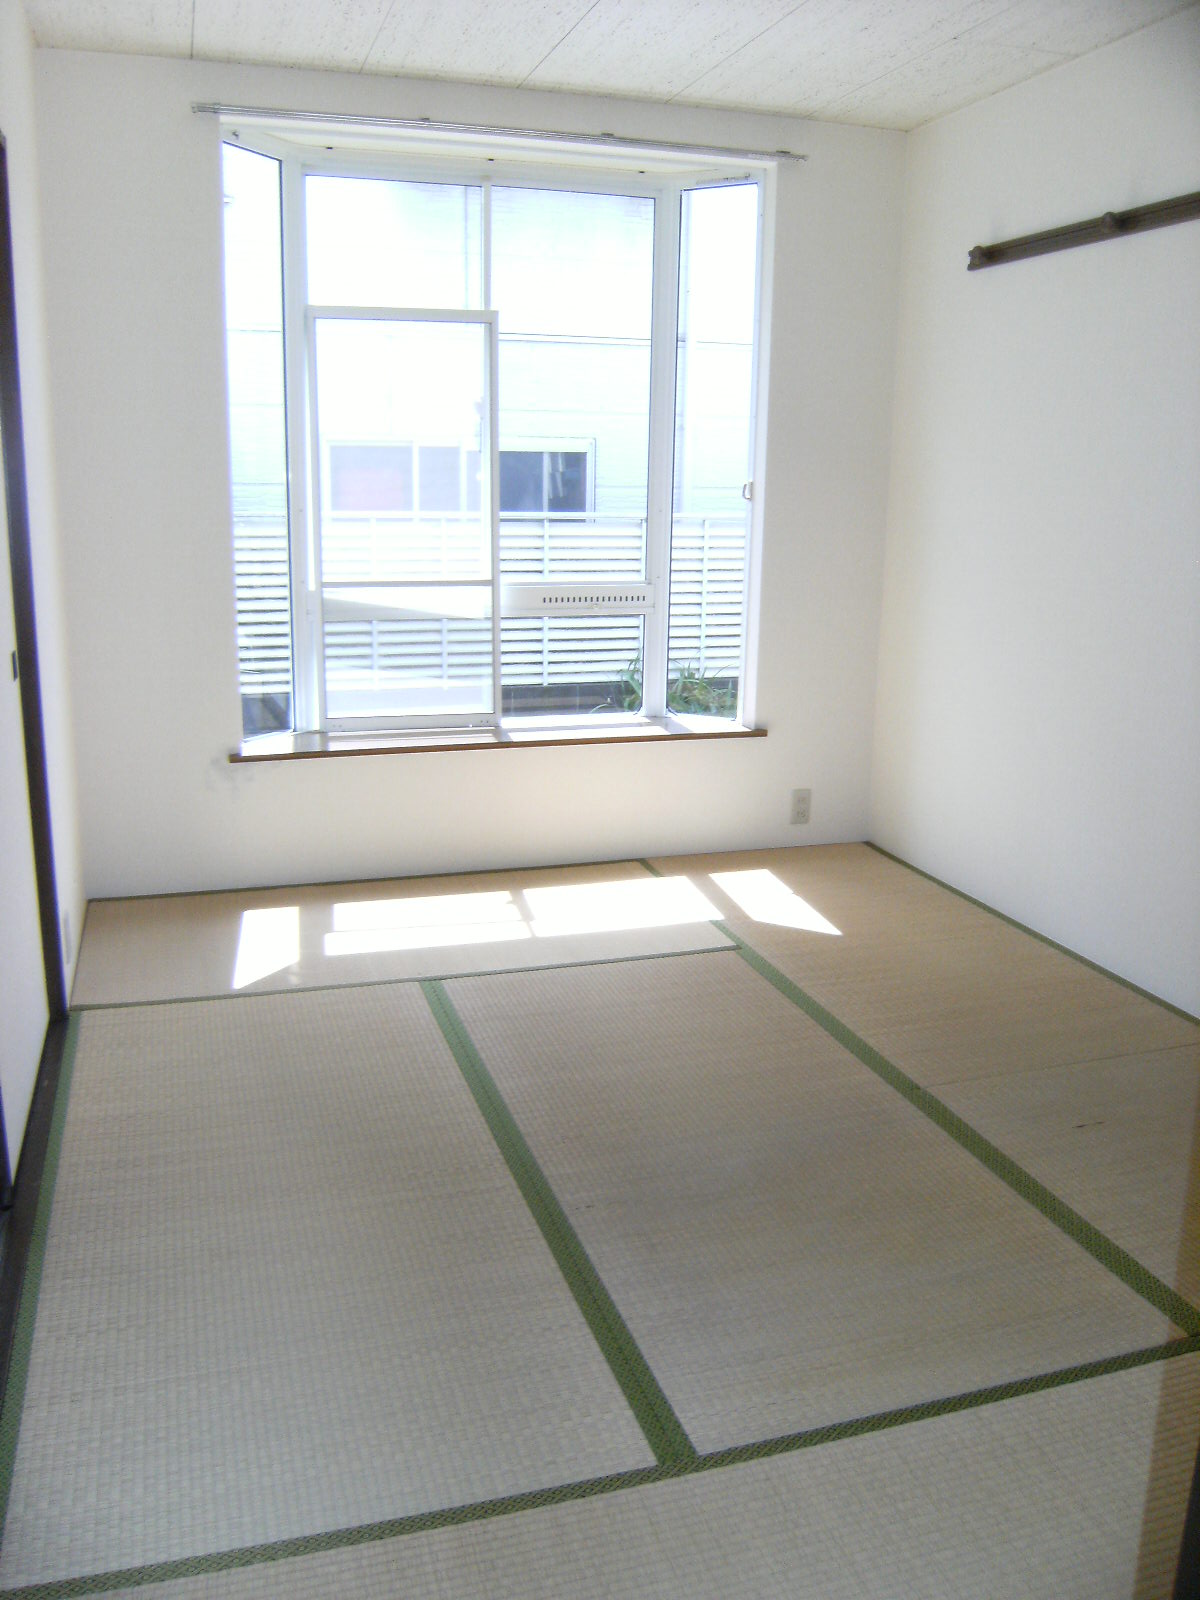 Living and room. Bay window with a Japanese-style room